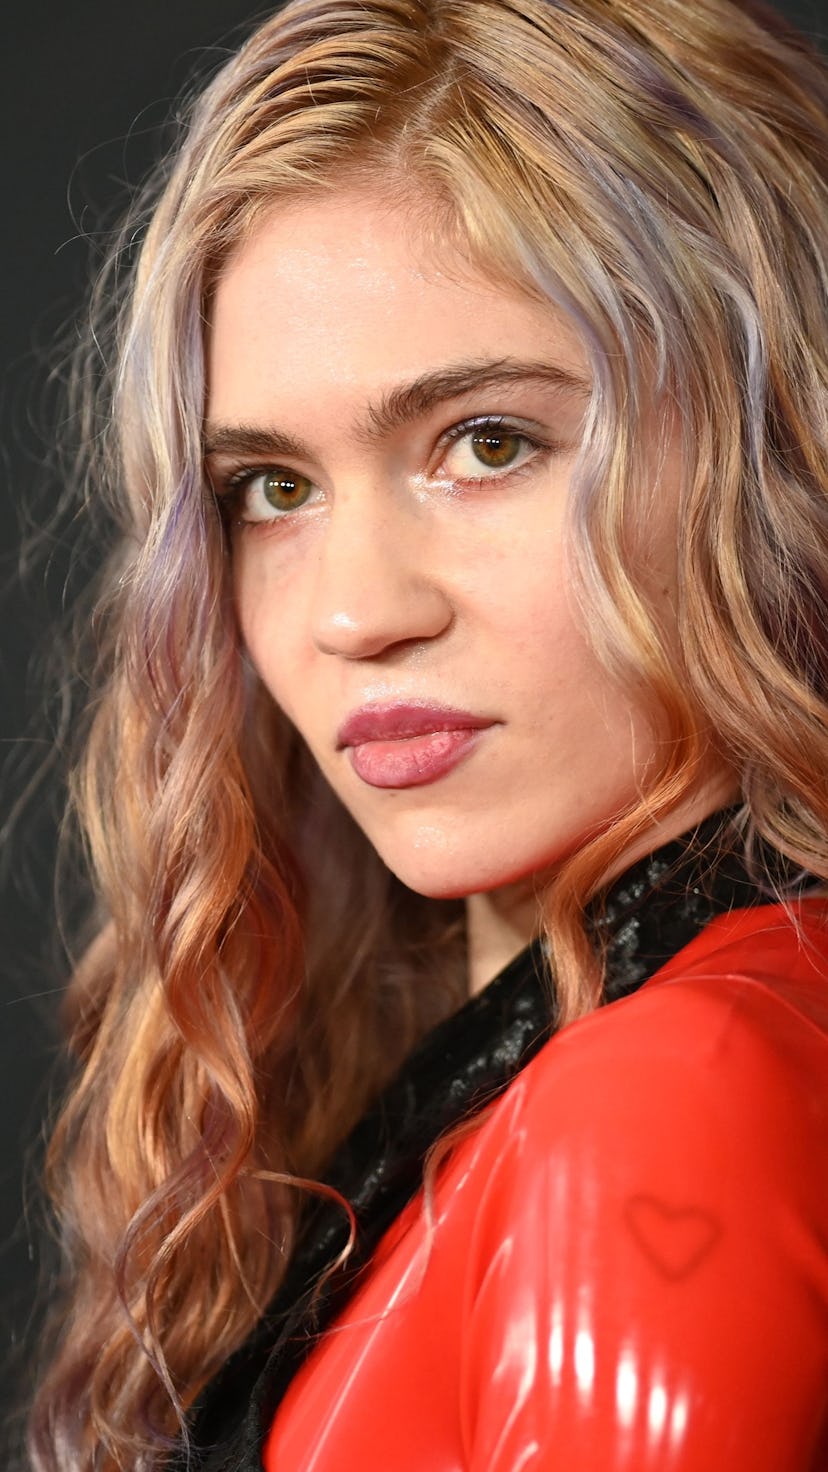 Grimes beauty evolution includes this look, featuring blonde hair highlighted with soft pastel shade...